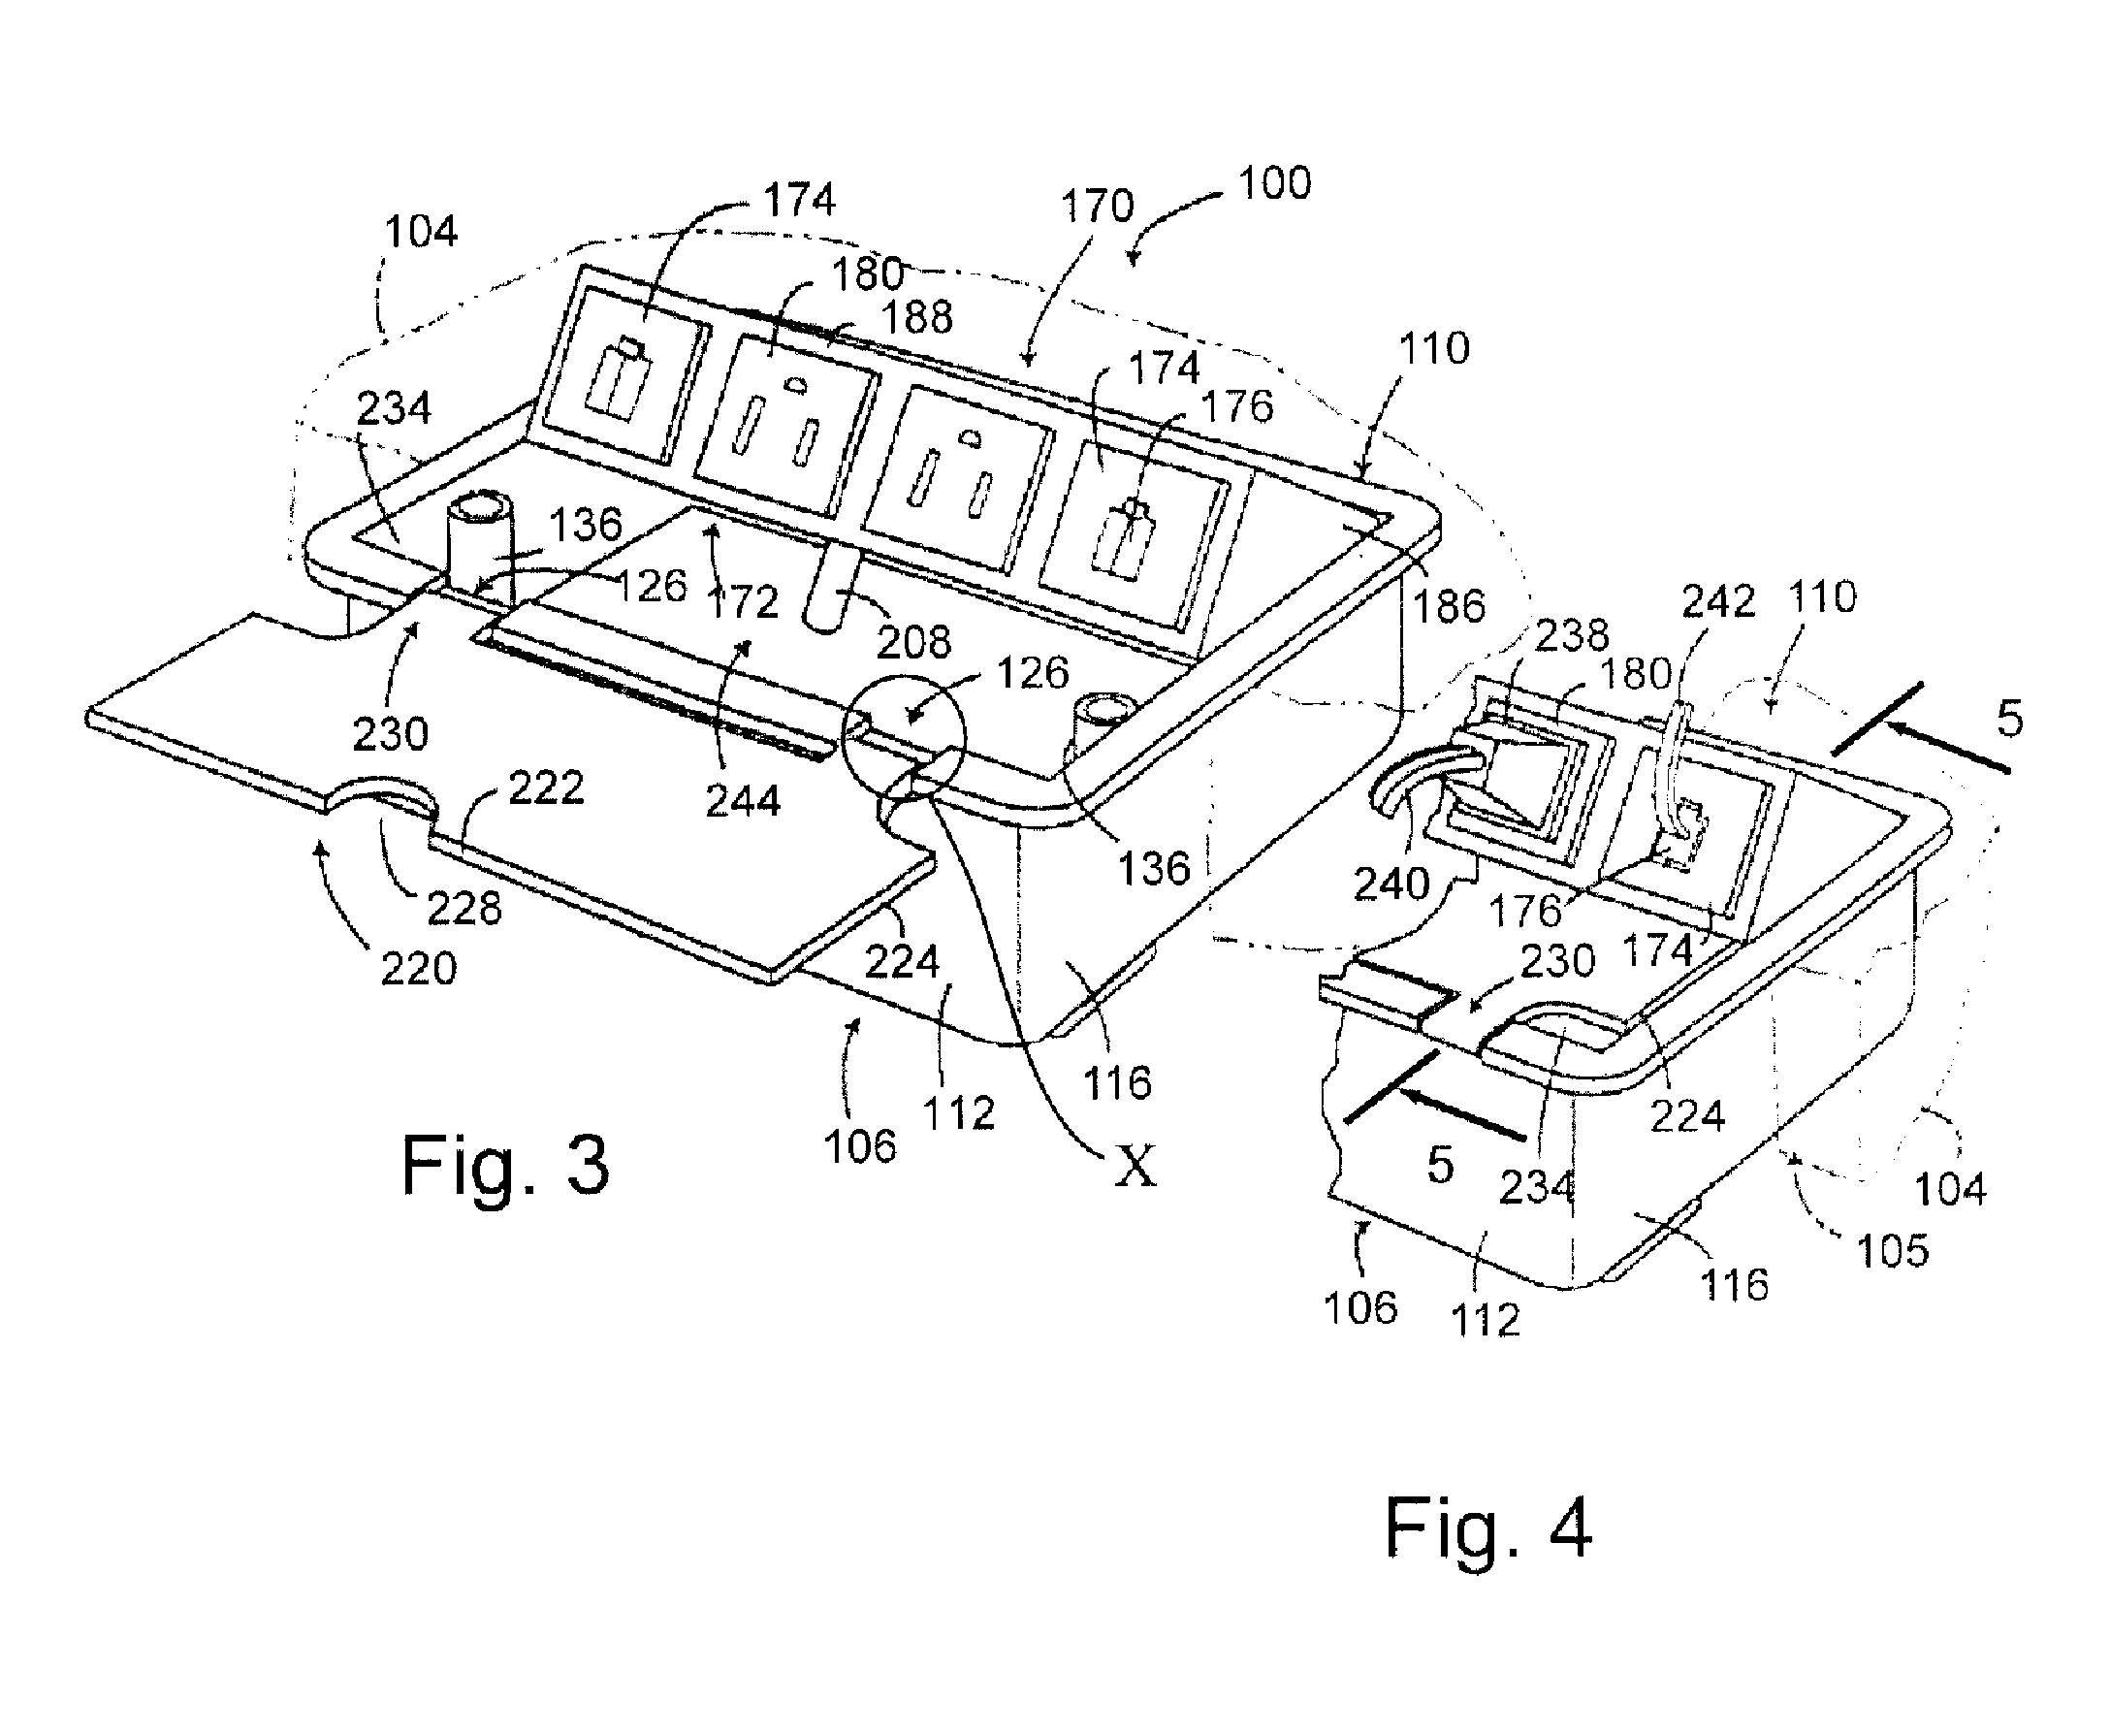 Expandable power and data center adapted for use with multiple mounts